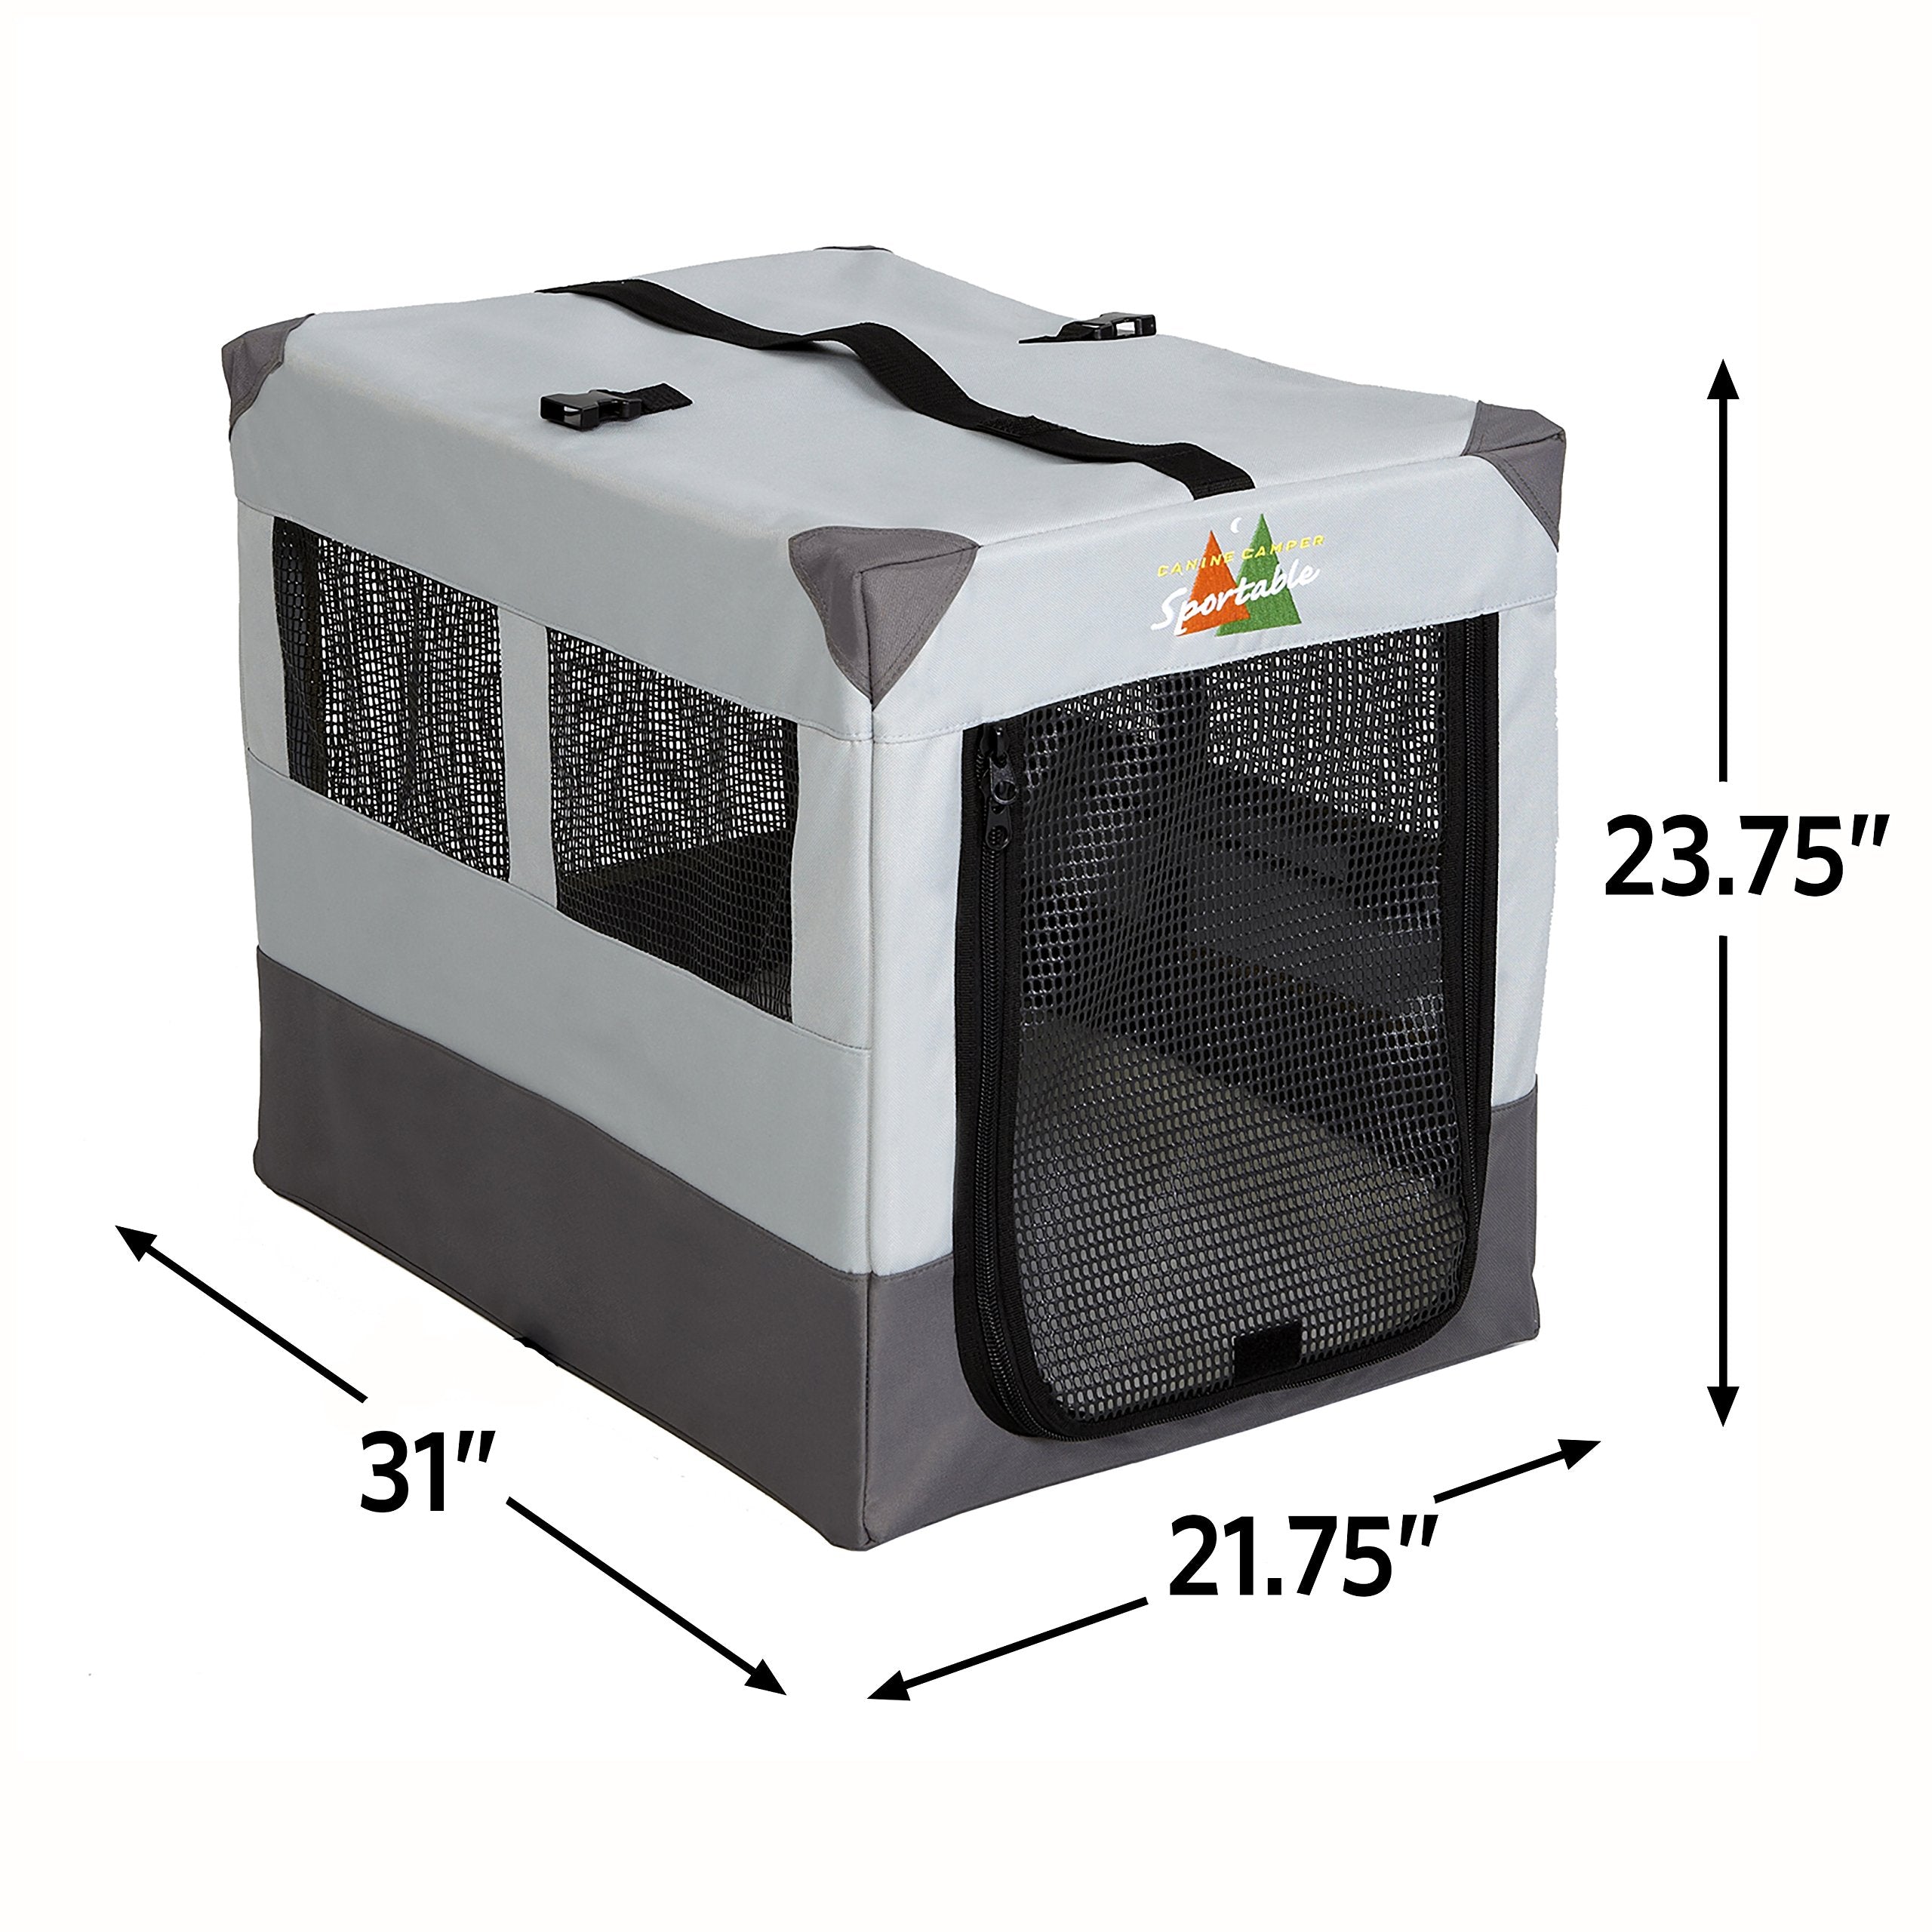 Midwest Canine Camper Pop-Up Tent Soft Folding Dog Crate - Gray - 30" X 20" X 19.5" In  